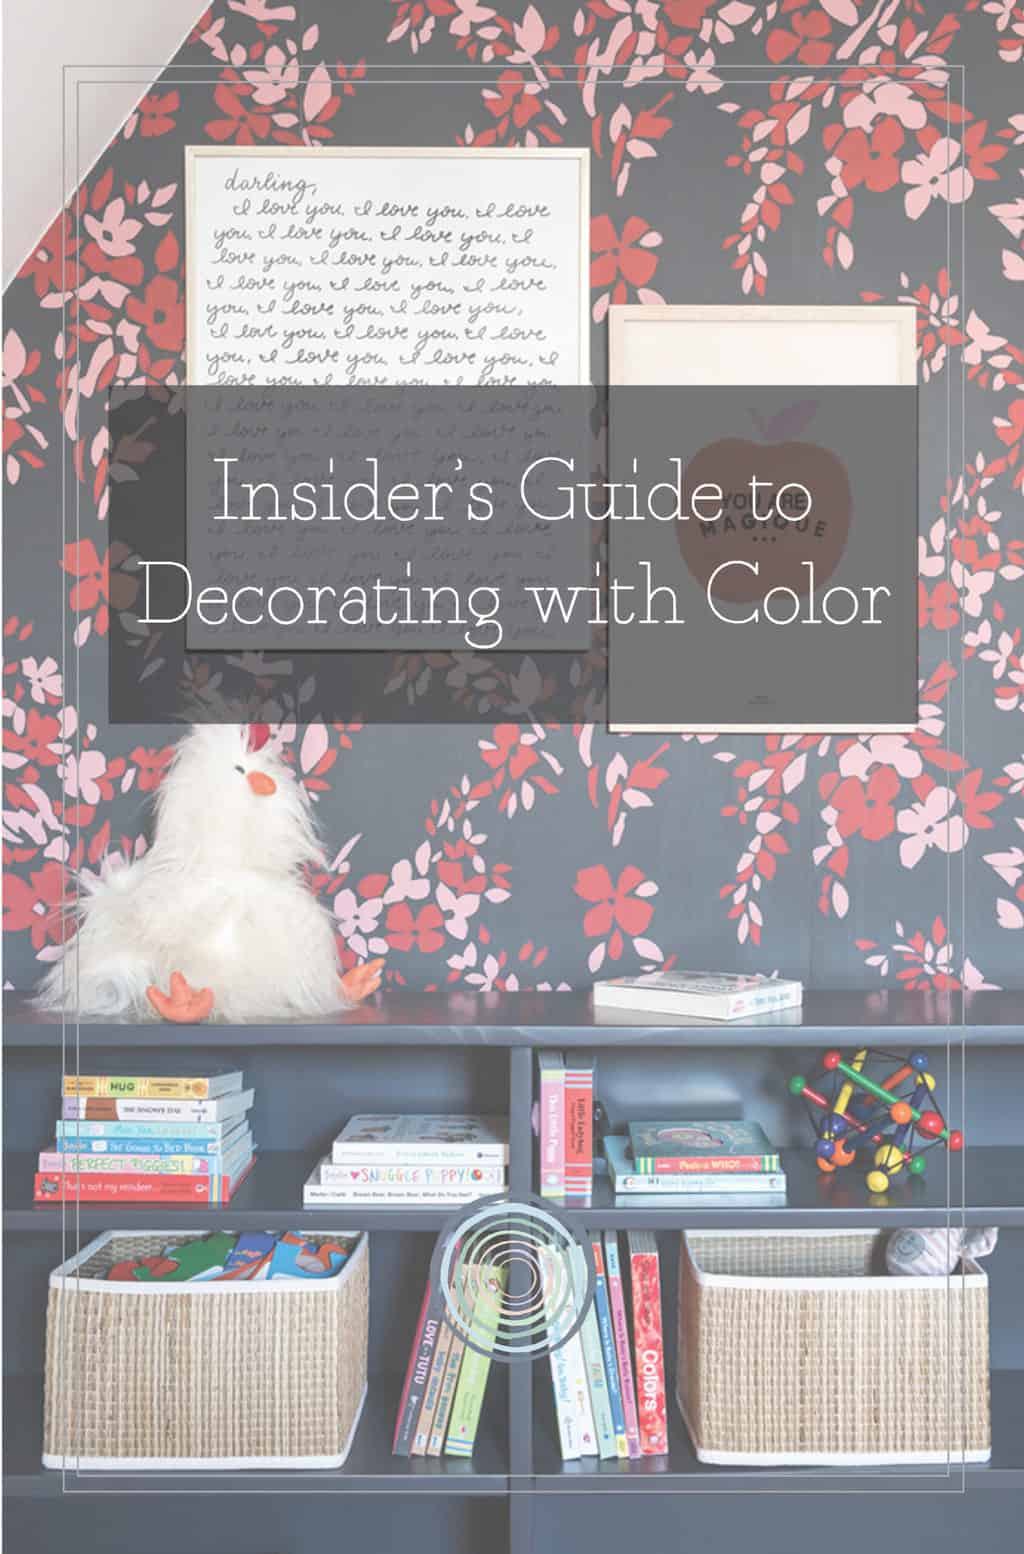 Insider's Guide to Decorating with Color PDF